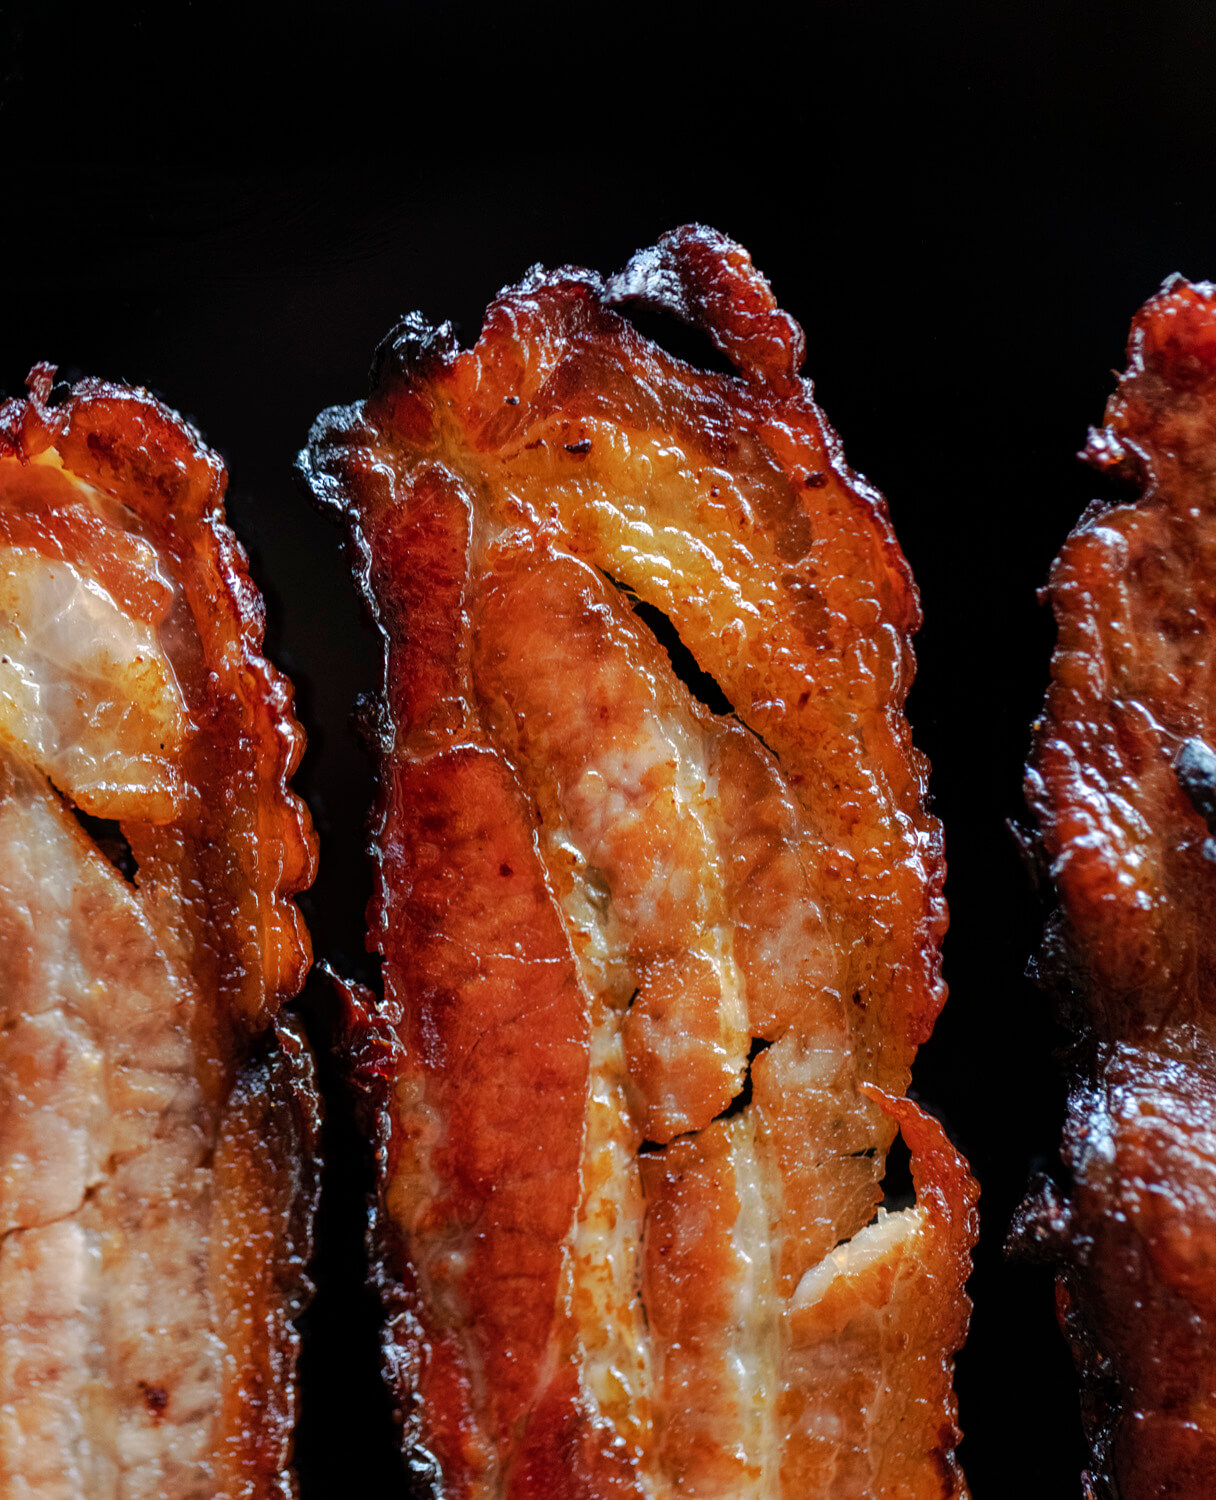 Crispy slices of bacon are showcased in close-up against a dark background, highlighting the textures and glossy sheen of the cooked meat with a play of light and shadow enhancing its savoury appeal.